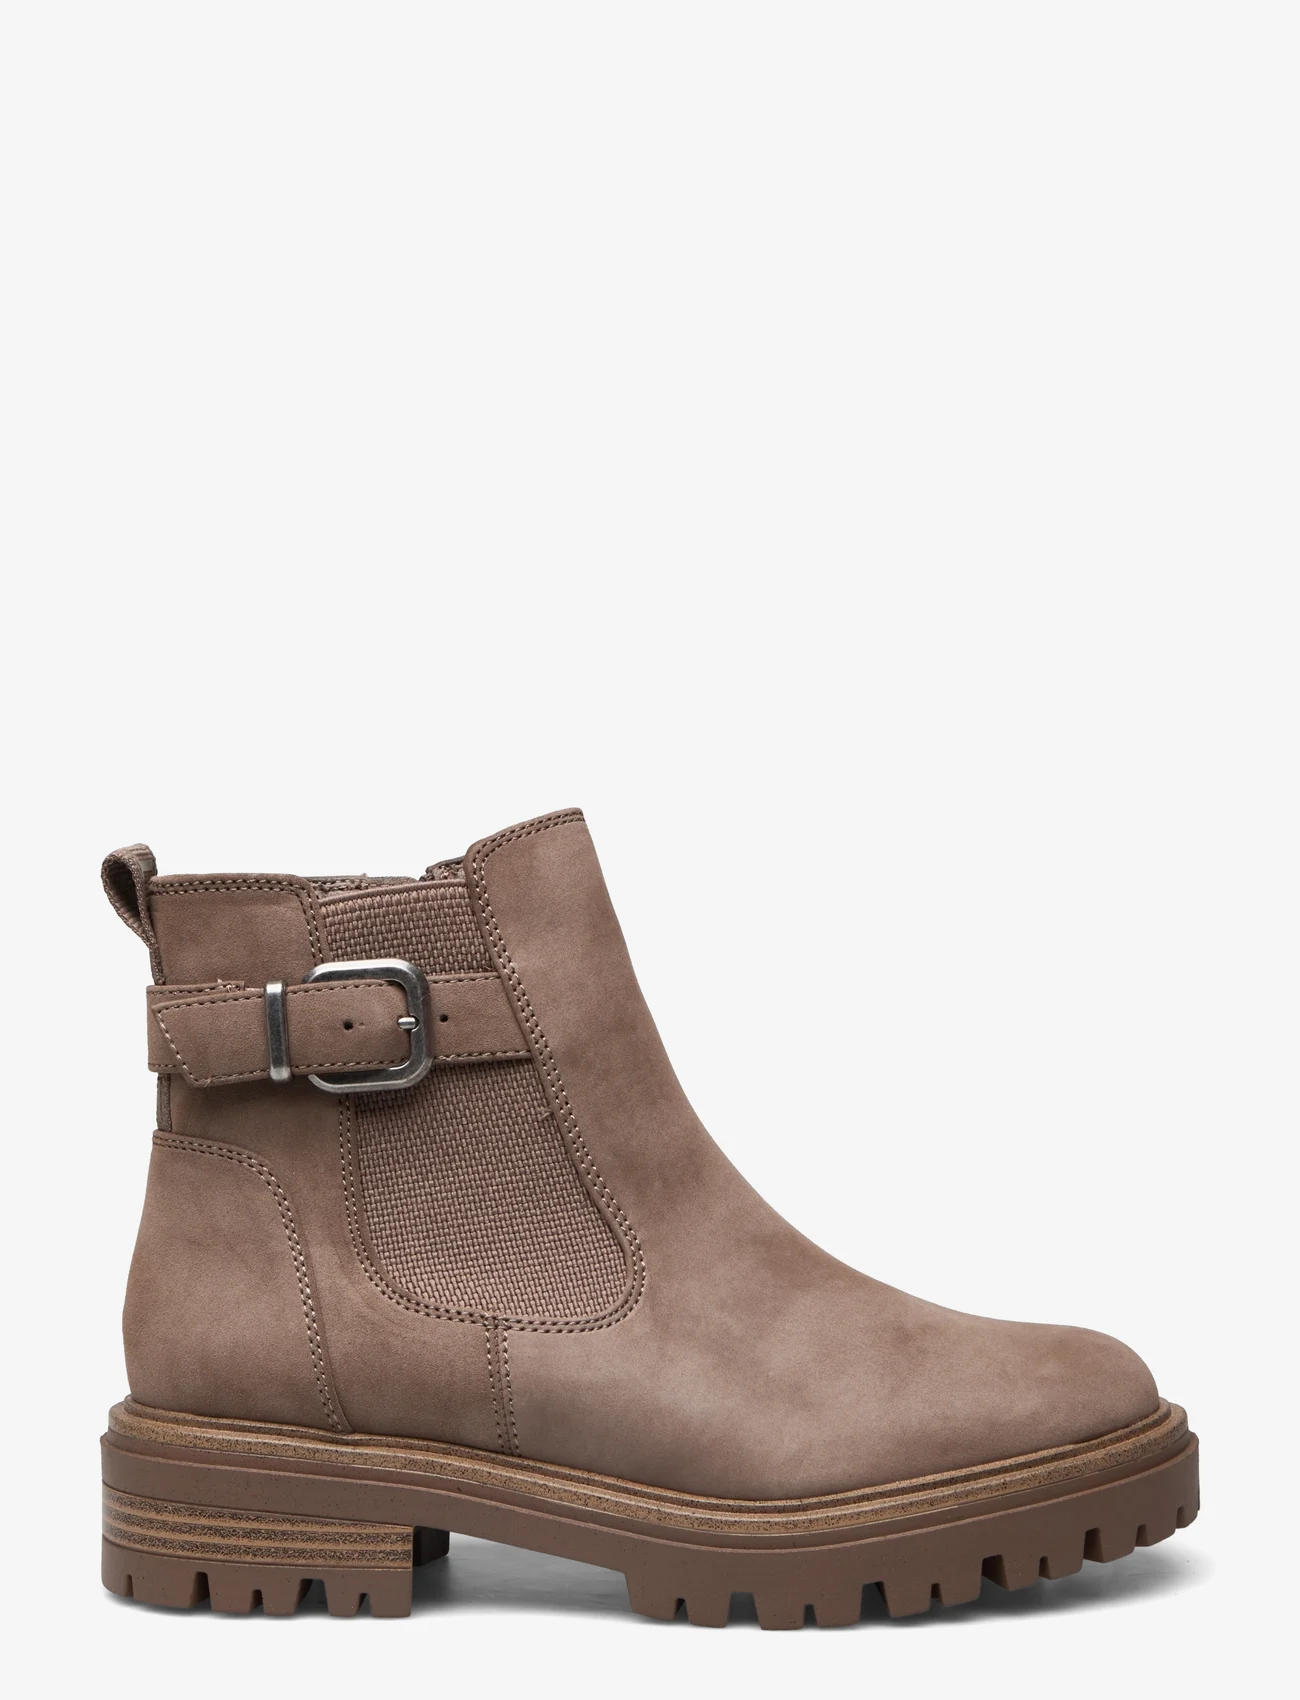 Tamaris - Women Boots - flat ankle boots - taupe - 1